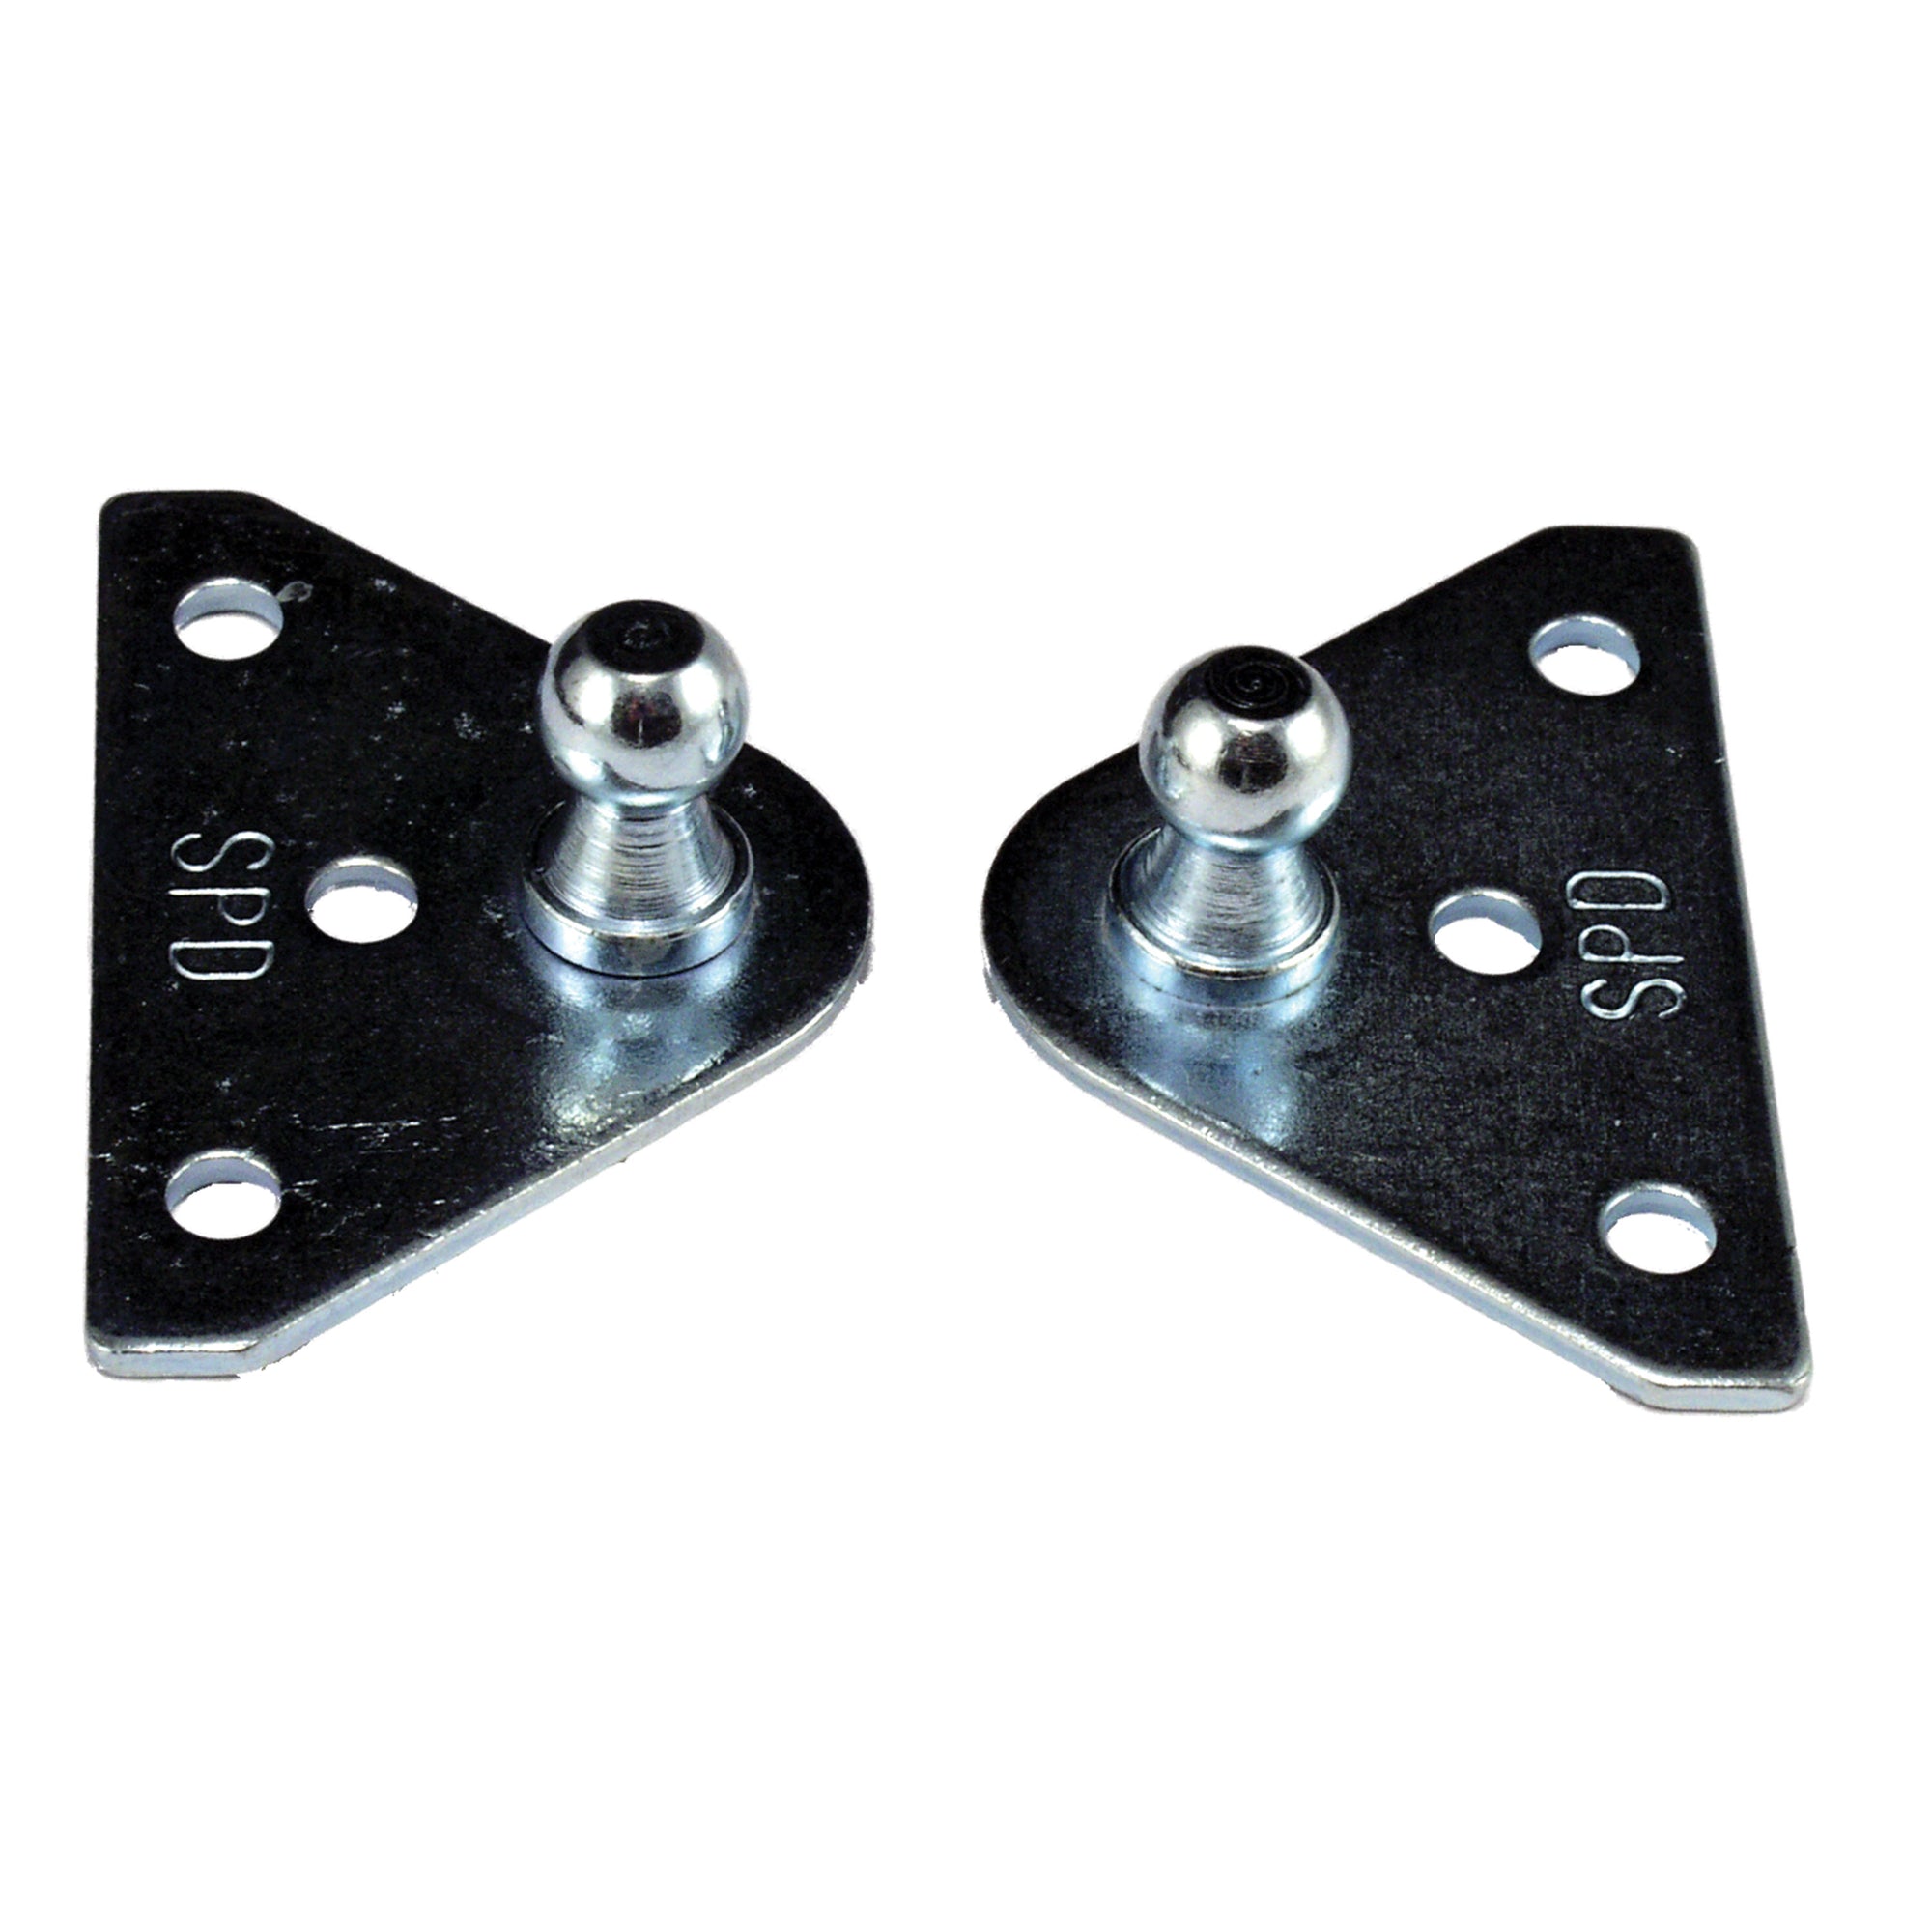 JR Products BR-1020 Gas Spring Mounting Bracket - Flat, Pack of 2